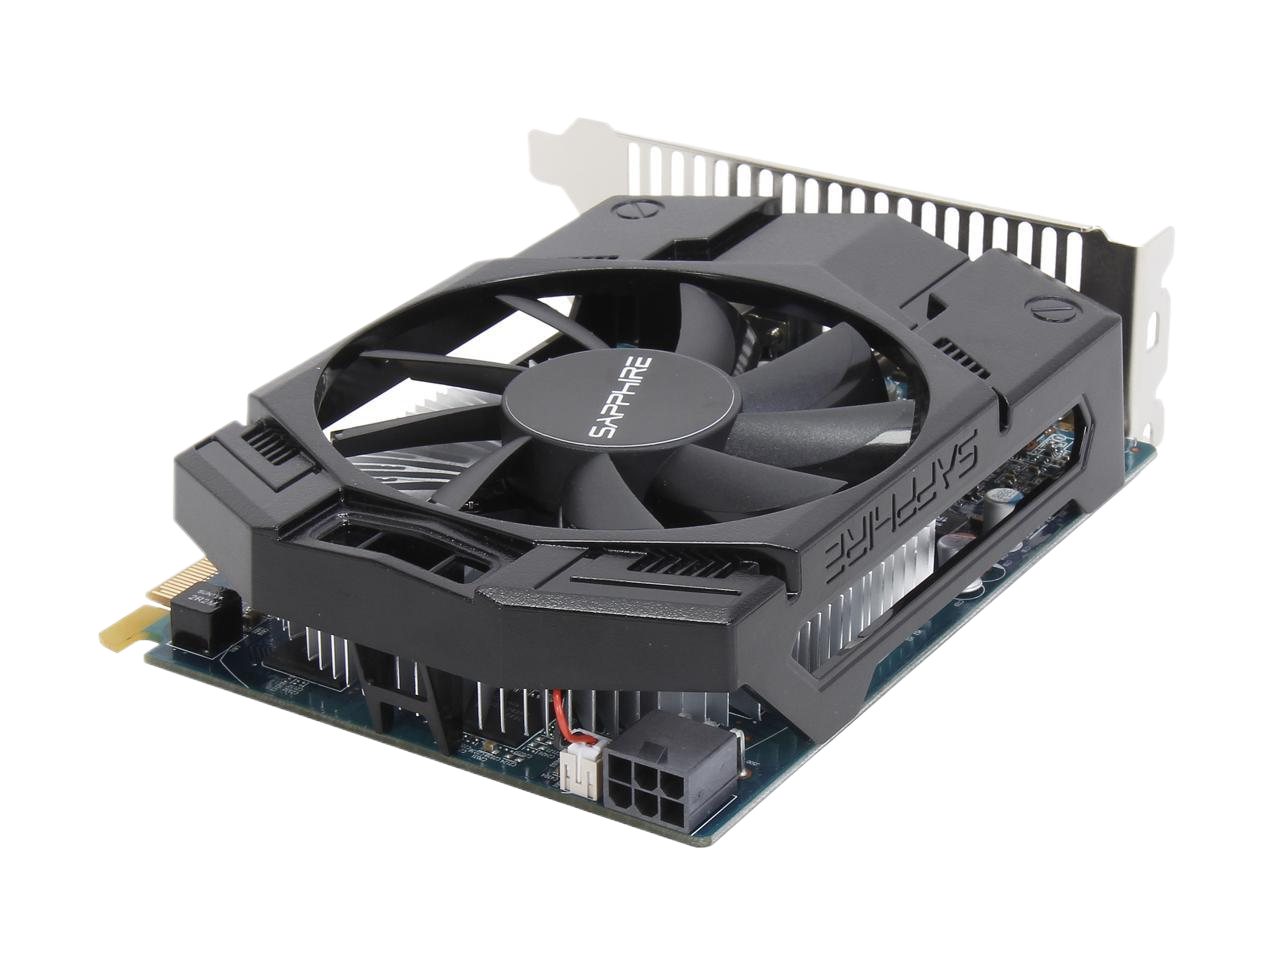 Sapphire Radeon R7 250X Graphic Card - 950 MHz Core - 1 GB GDDR5 - PCI Express 3.0 - Dual Slot Space Required